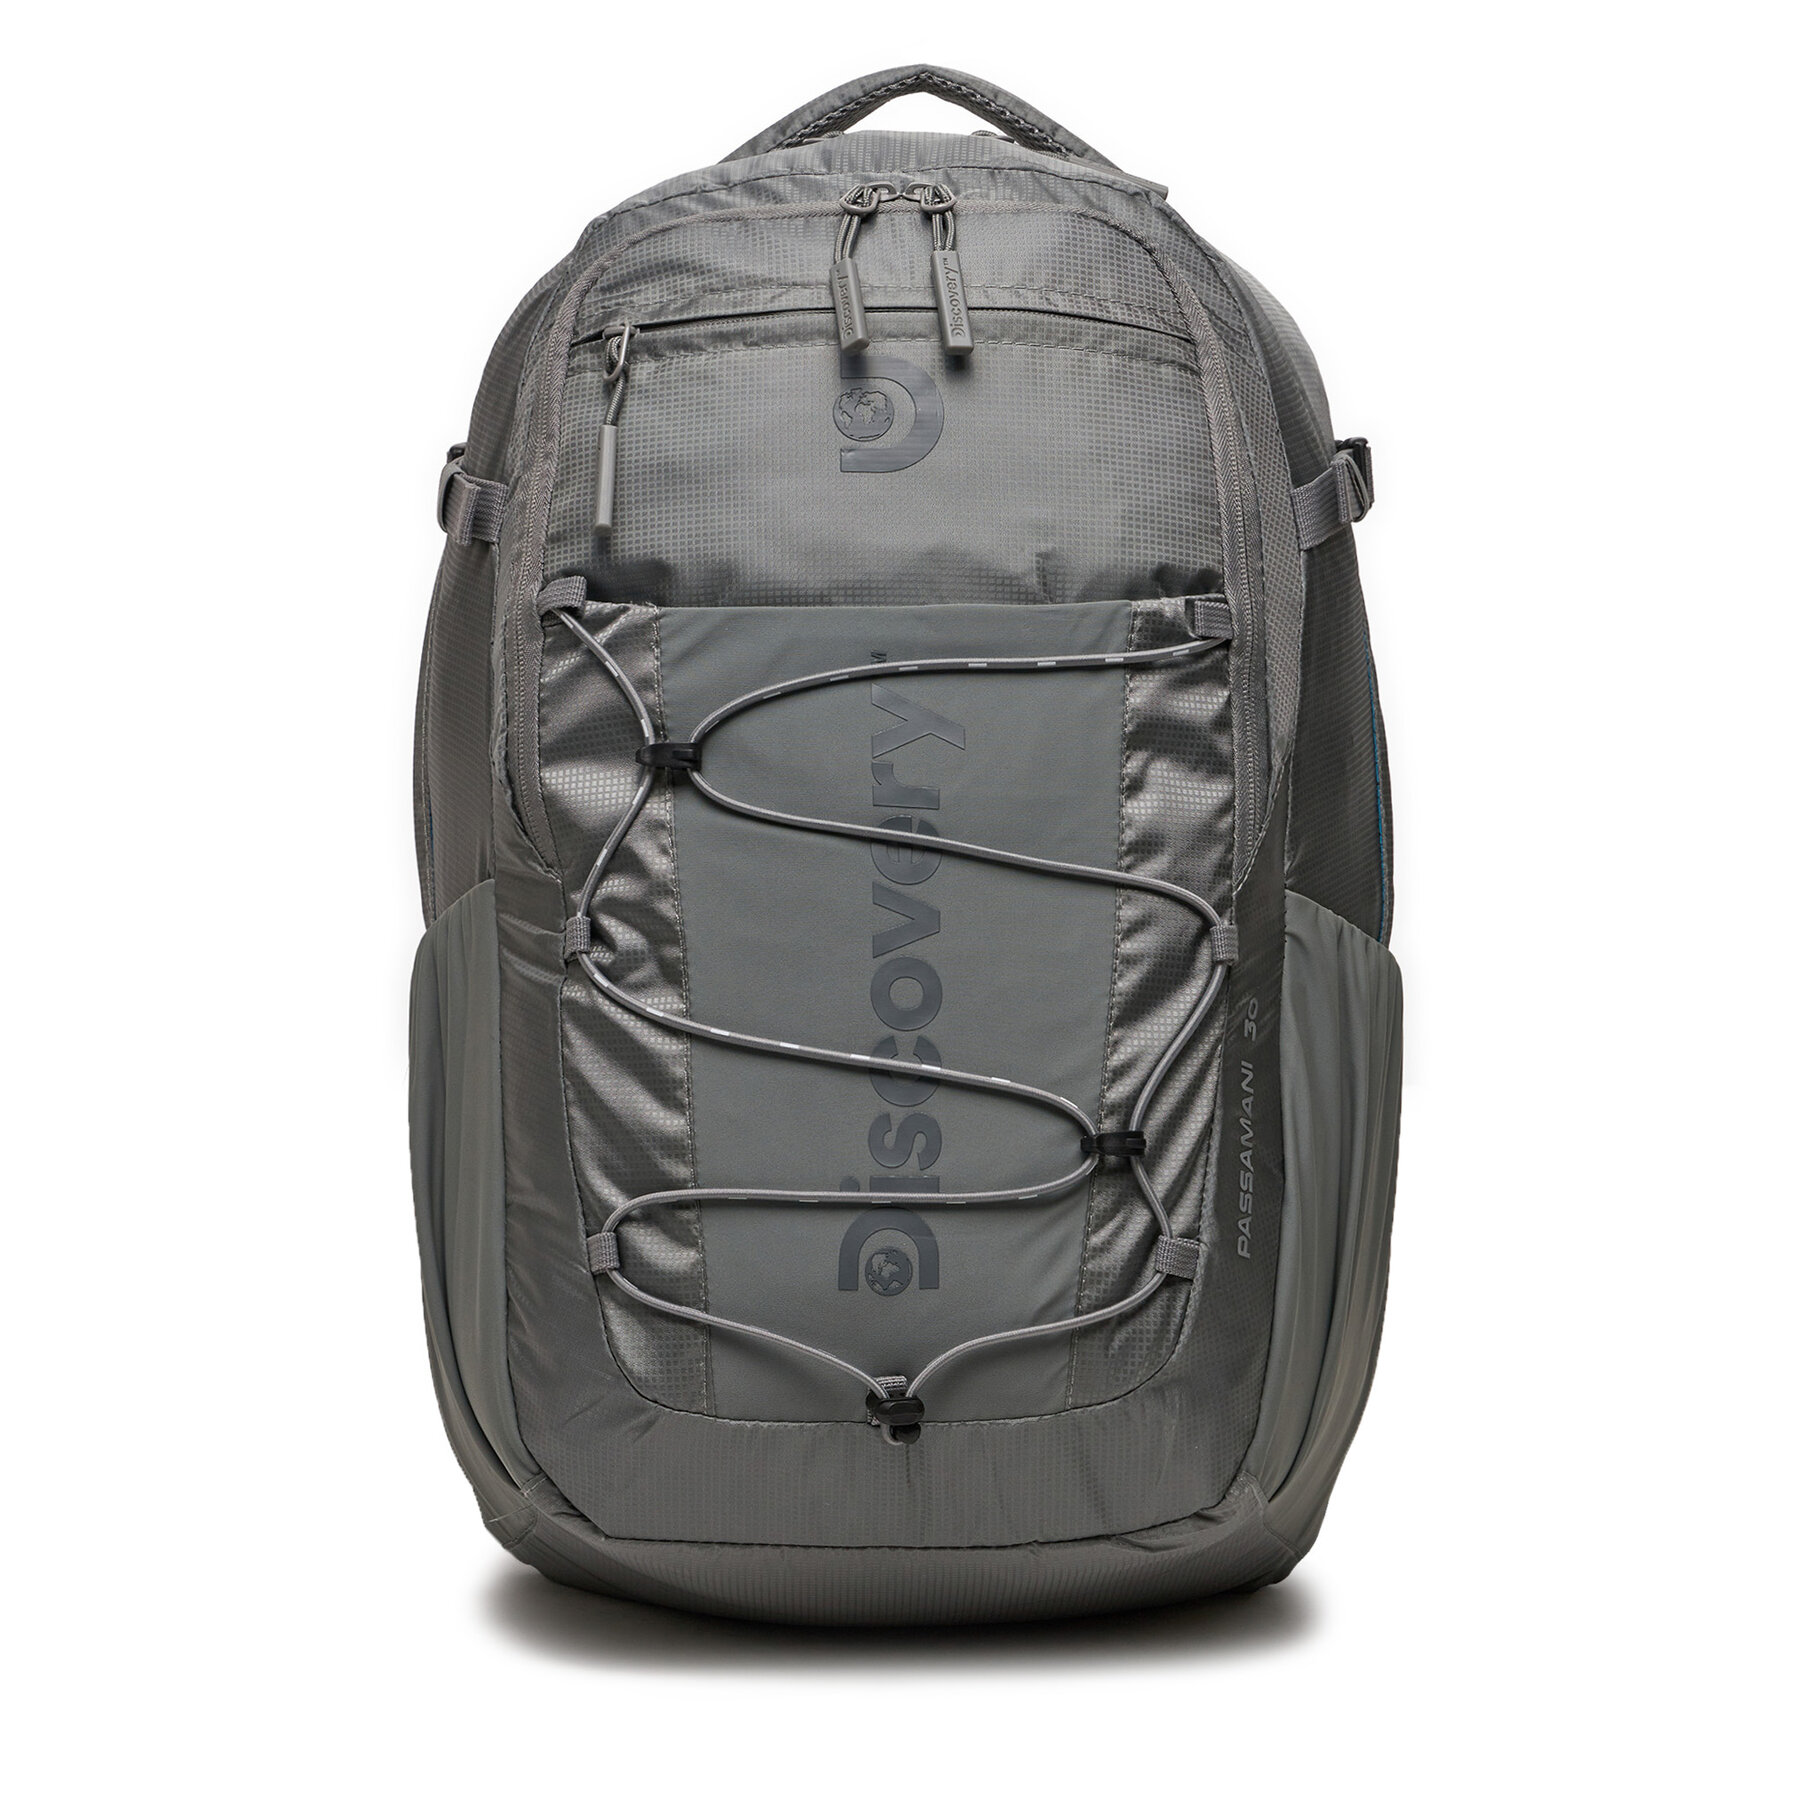 Rucksack Discovery Passamani30 Backpack D00613.22 Grau von Discovery